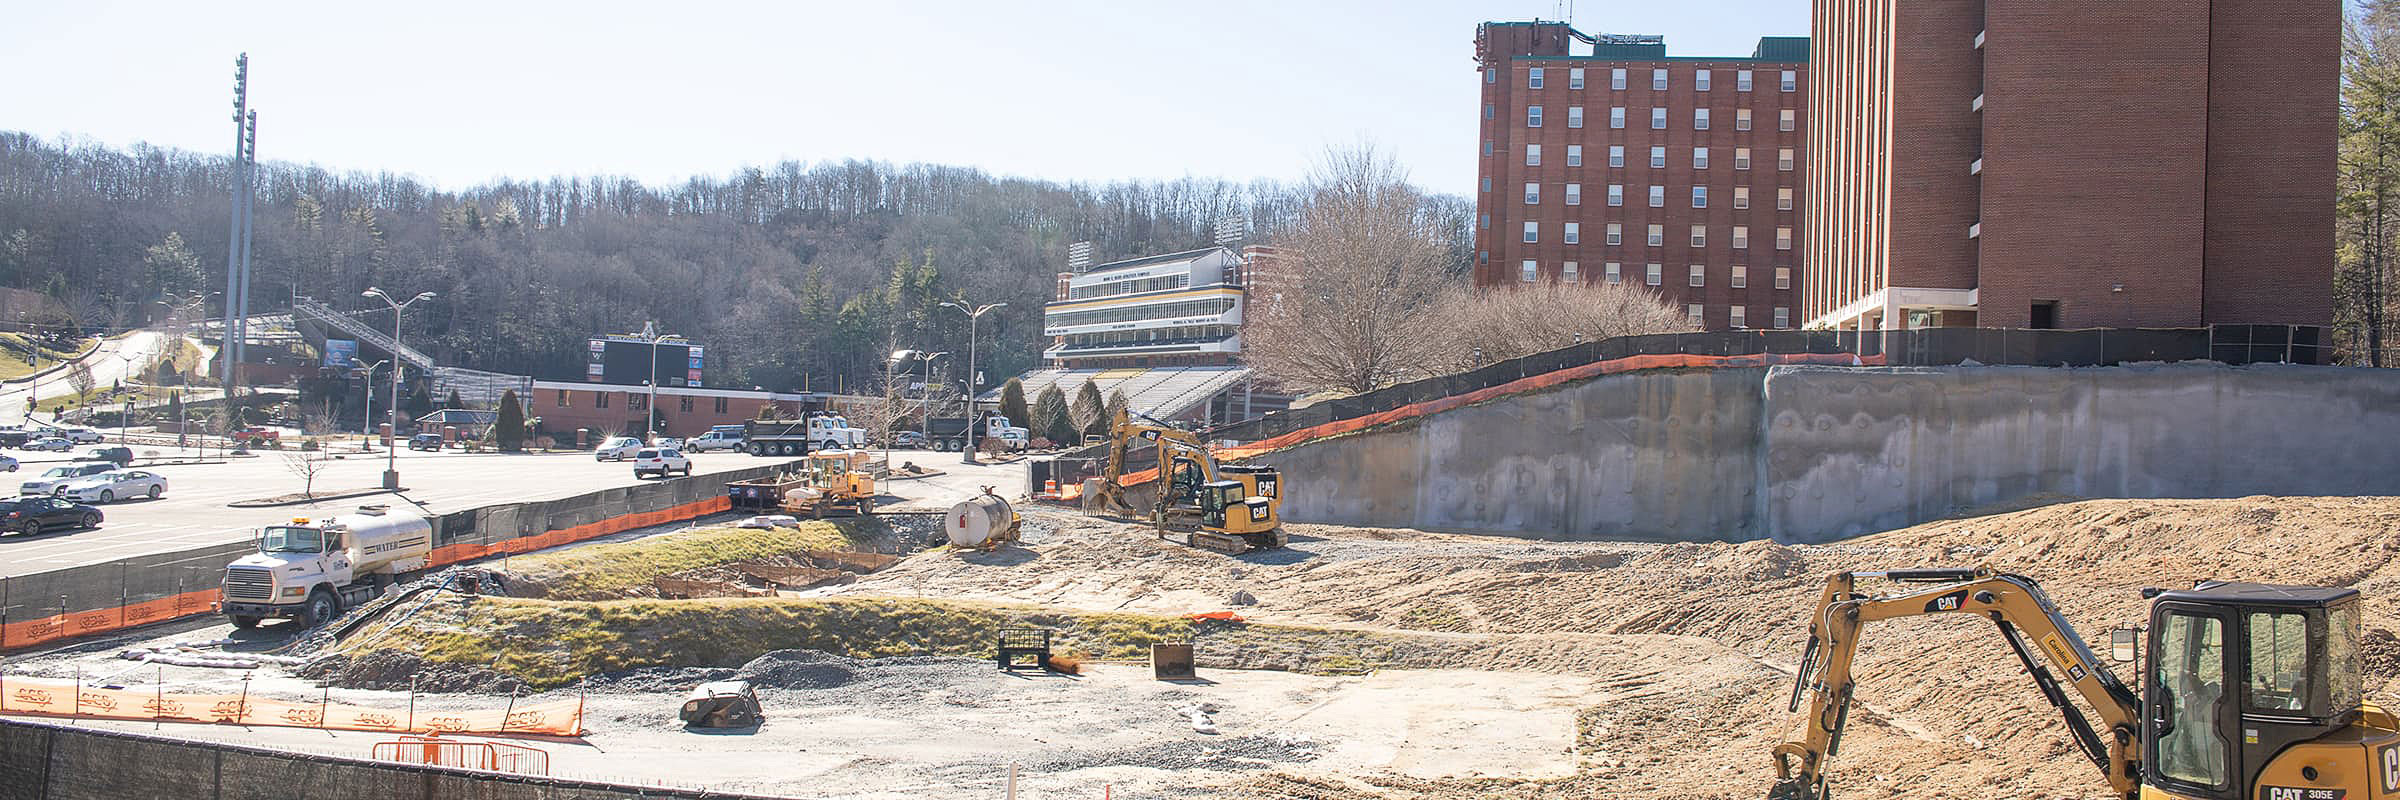 Construction site on west side of campus